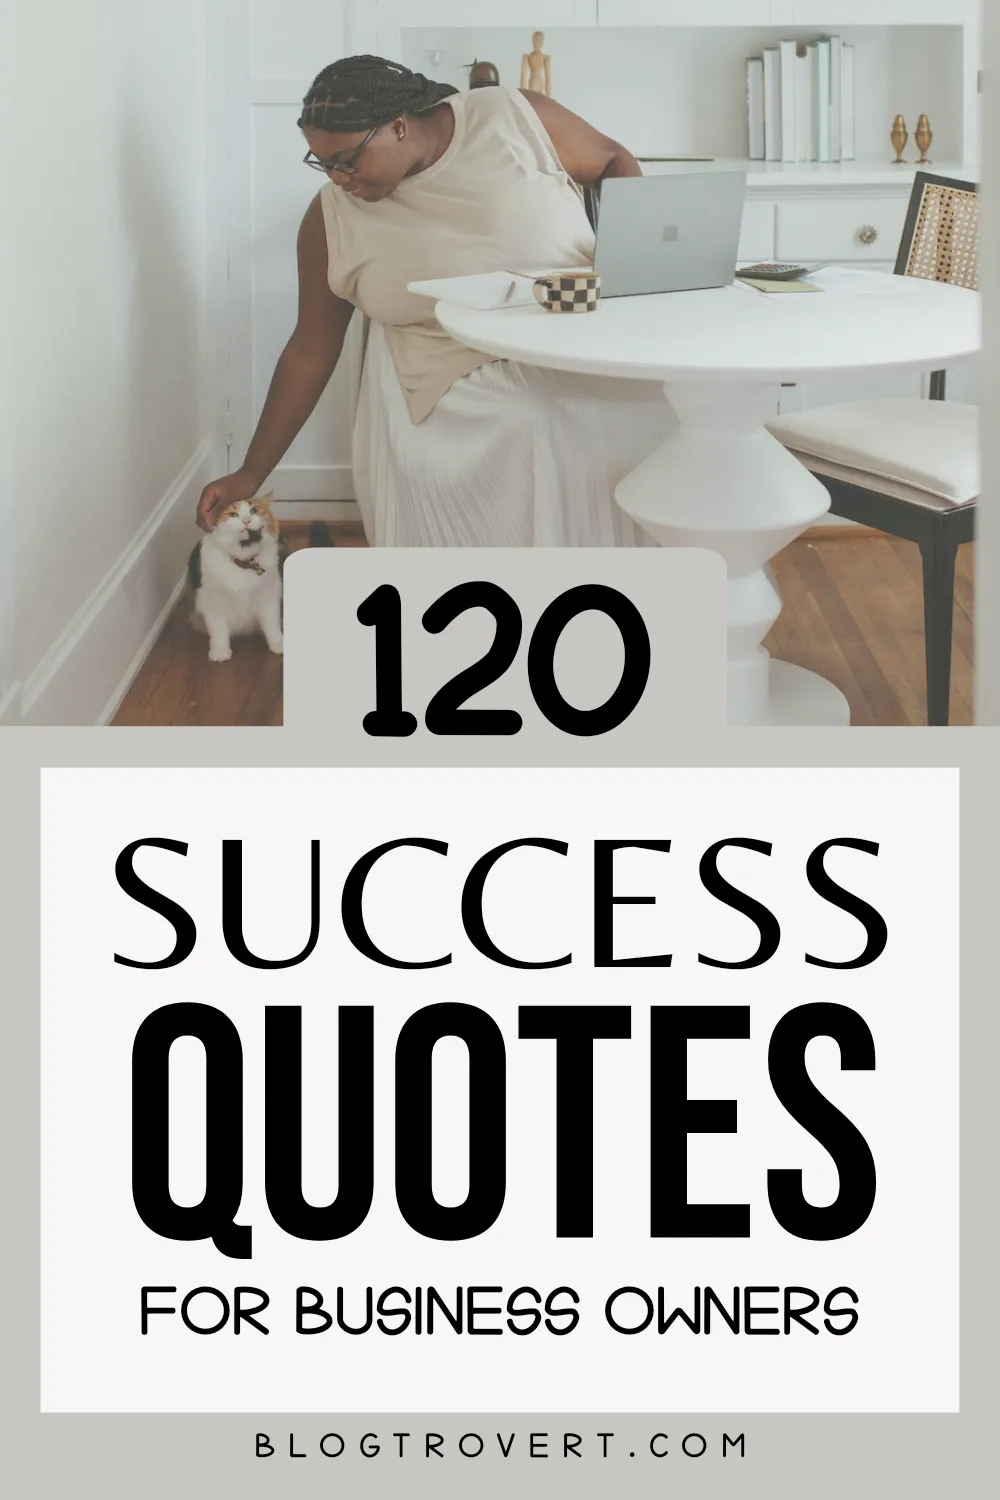 Success quotes for business owners